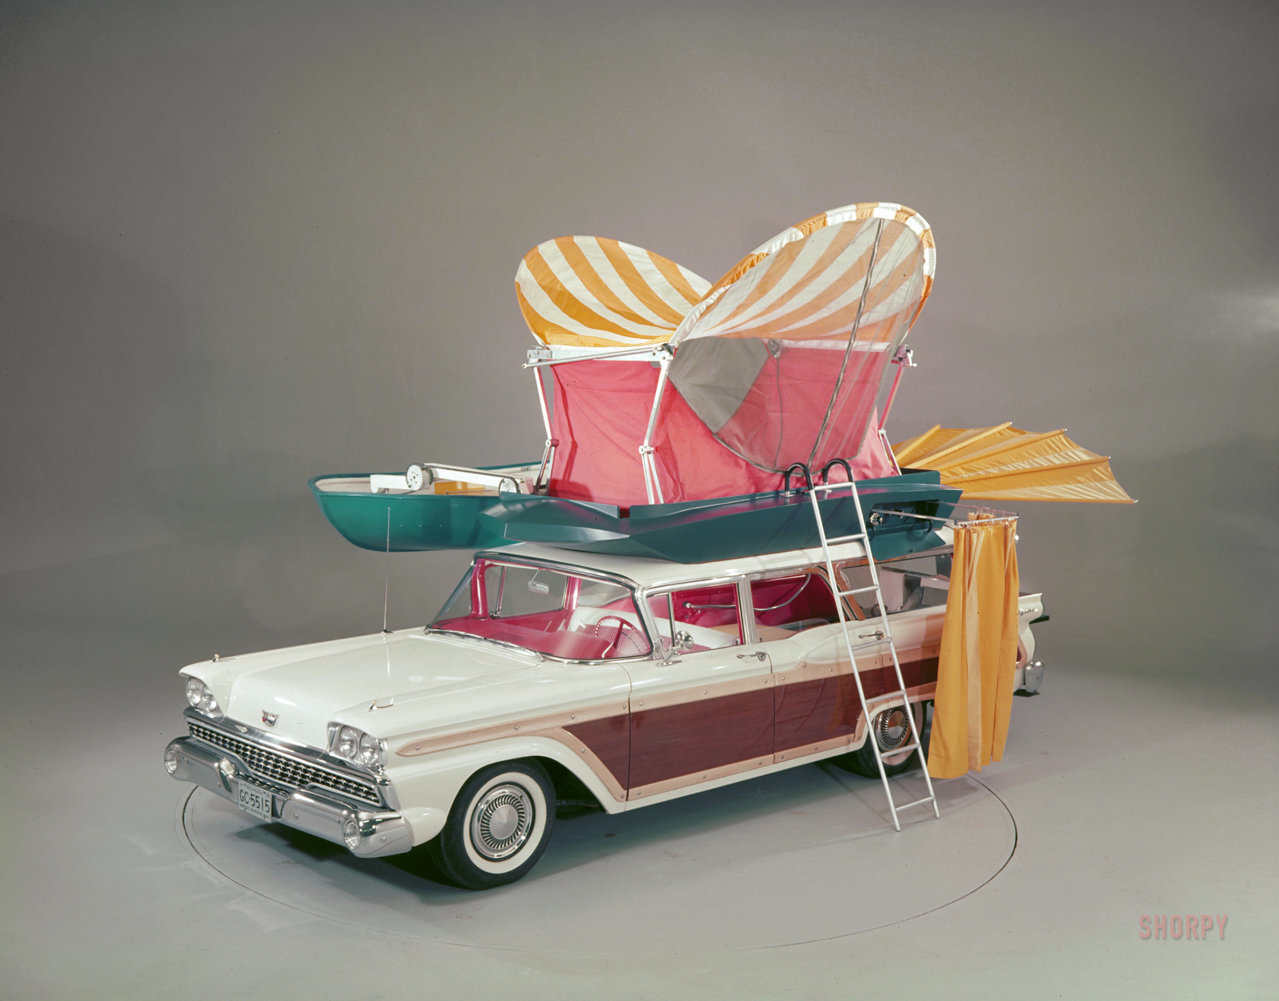 SHORPY-1959-Ford-Country-Squire-pushbutton-camper.jpg